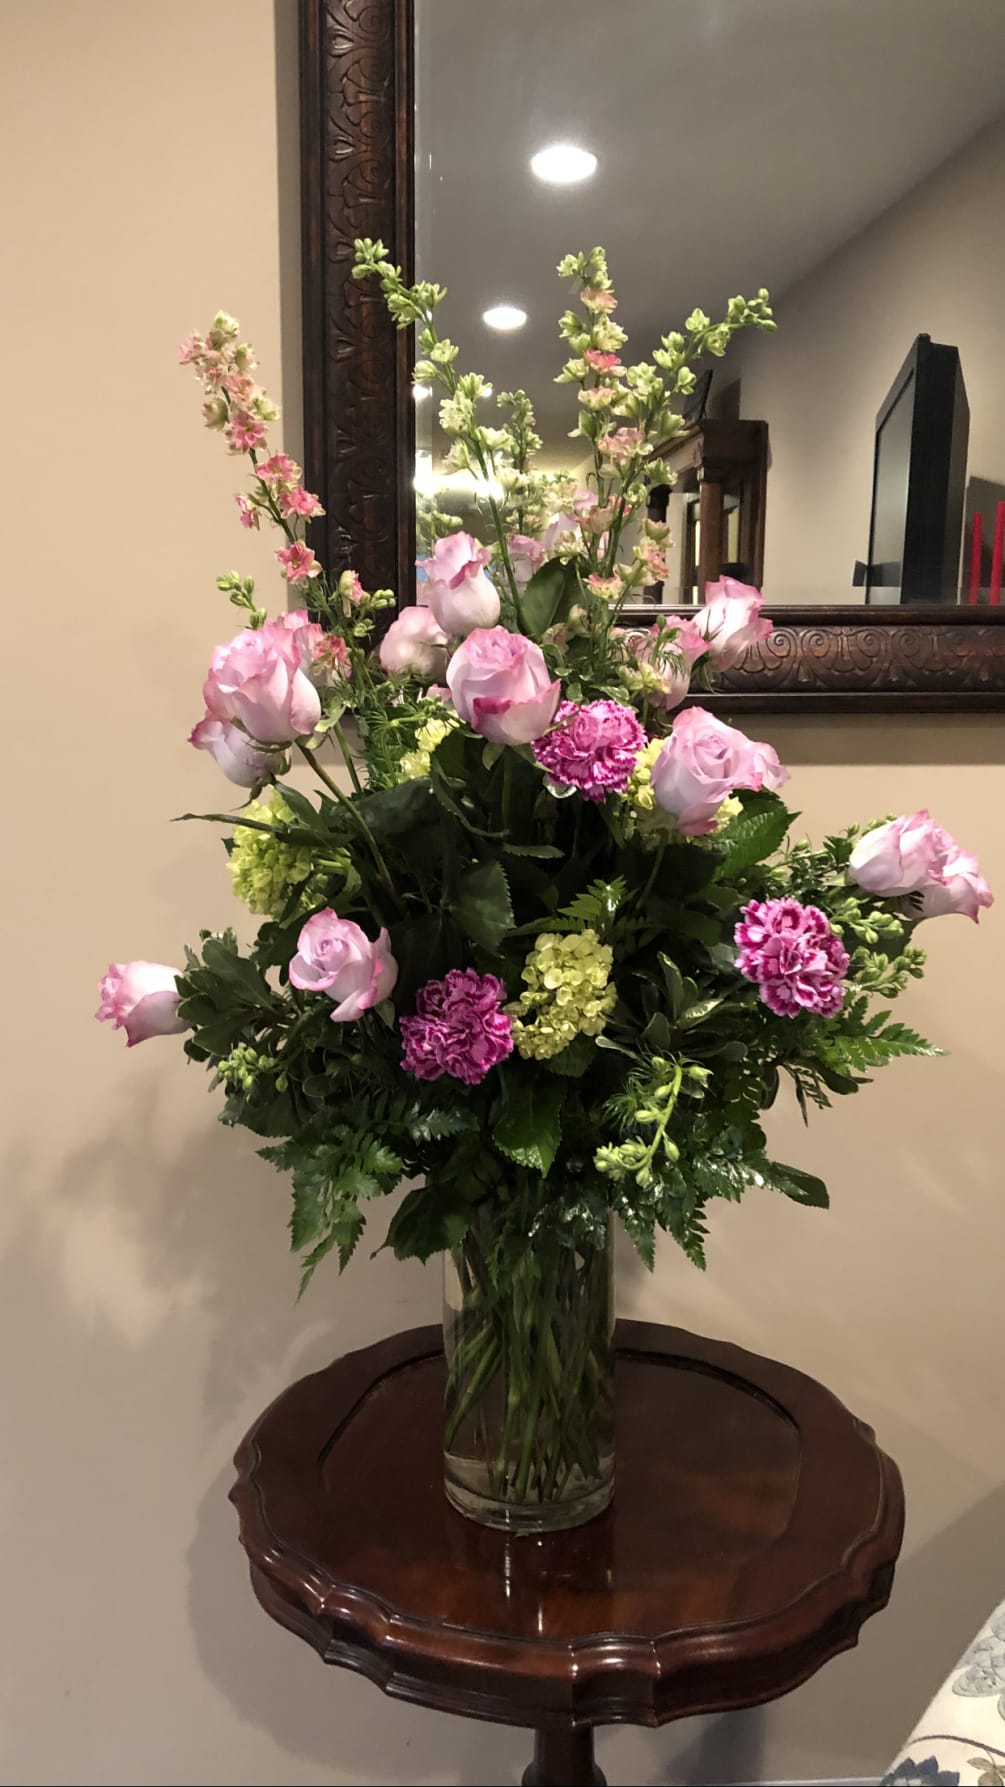 18 Lavender roses with a touch of pink on the ends. Green